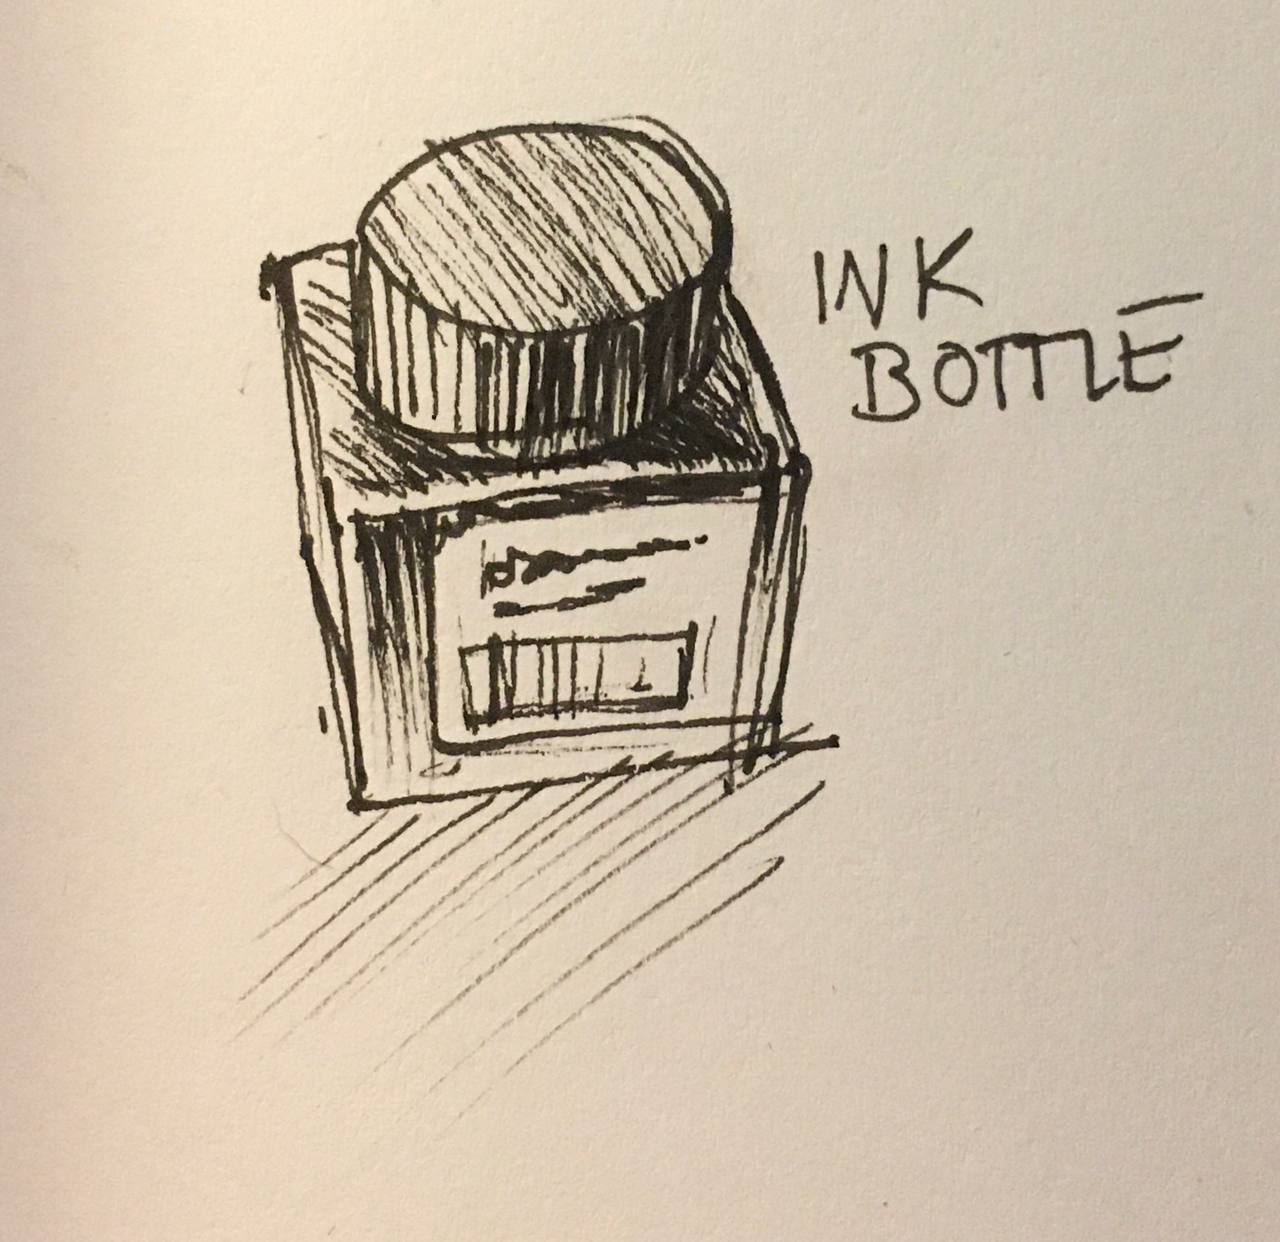 a sketch of a bottle of ink